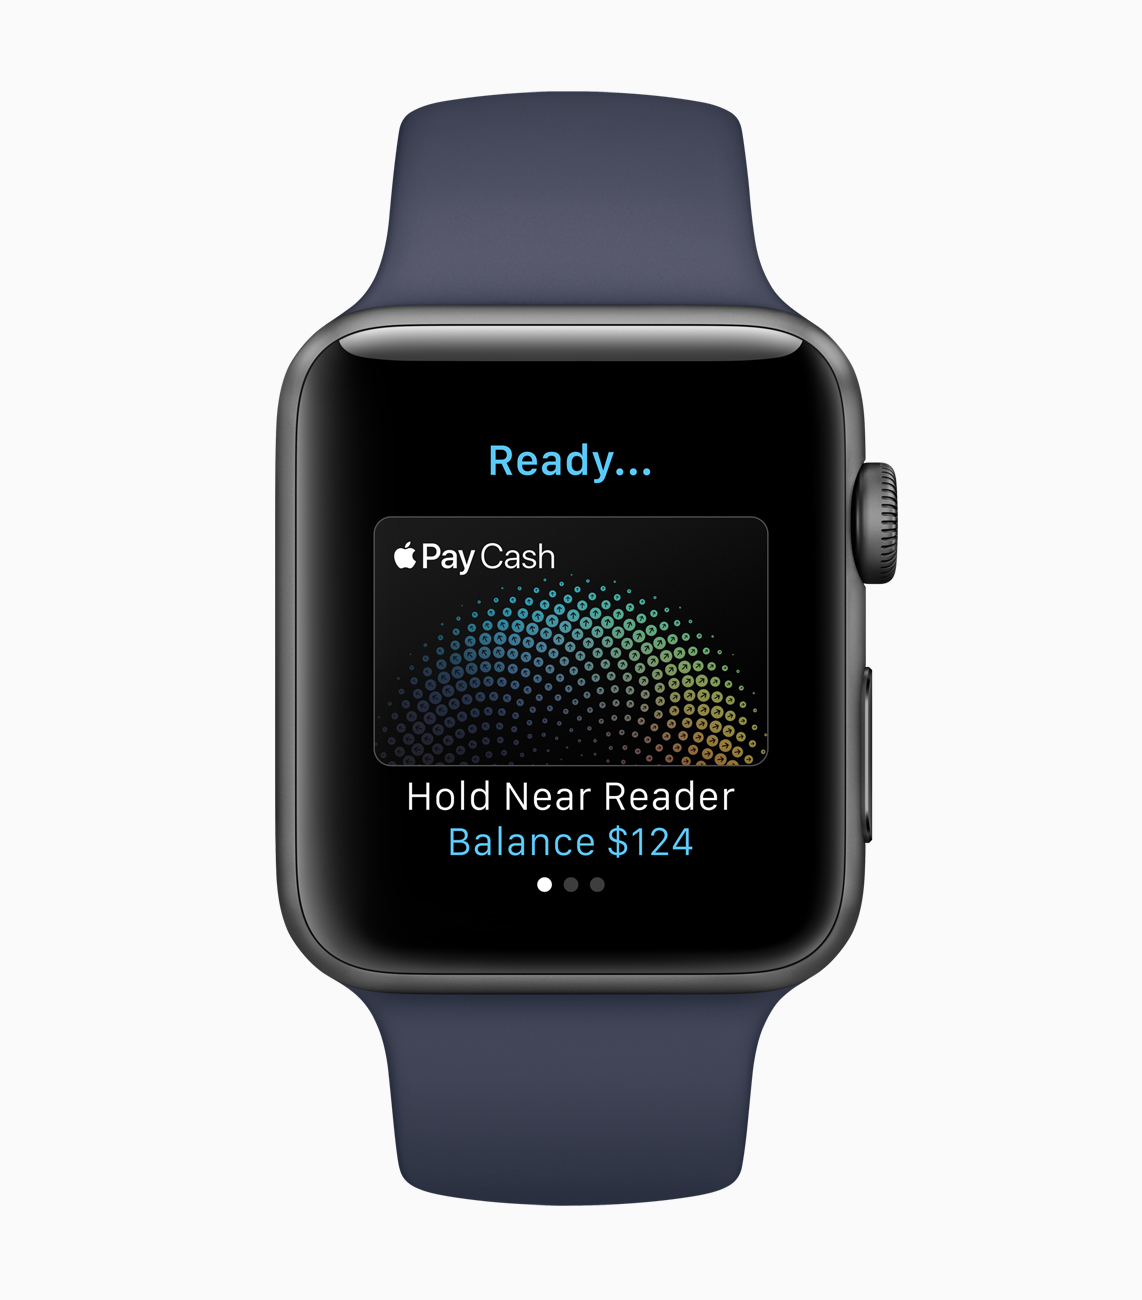 Apple Debuts watchOS 4 With Proactive Siri Watch Face, Activity Coaching, New Music Experience, More